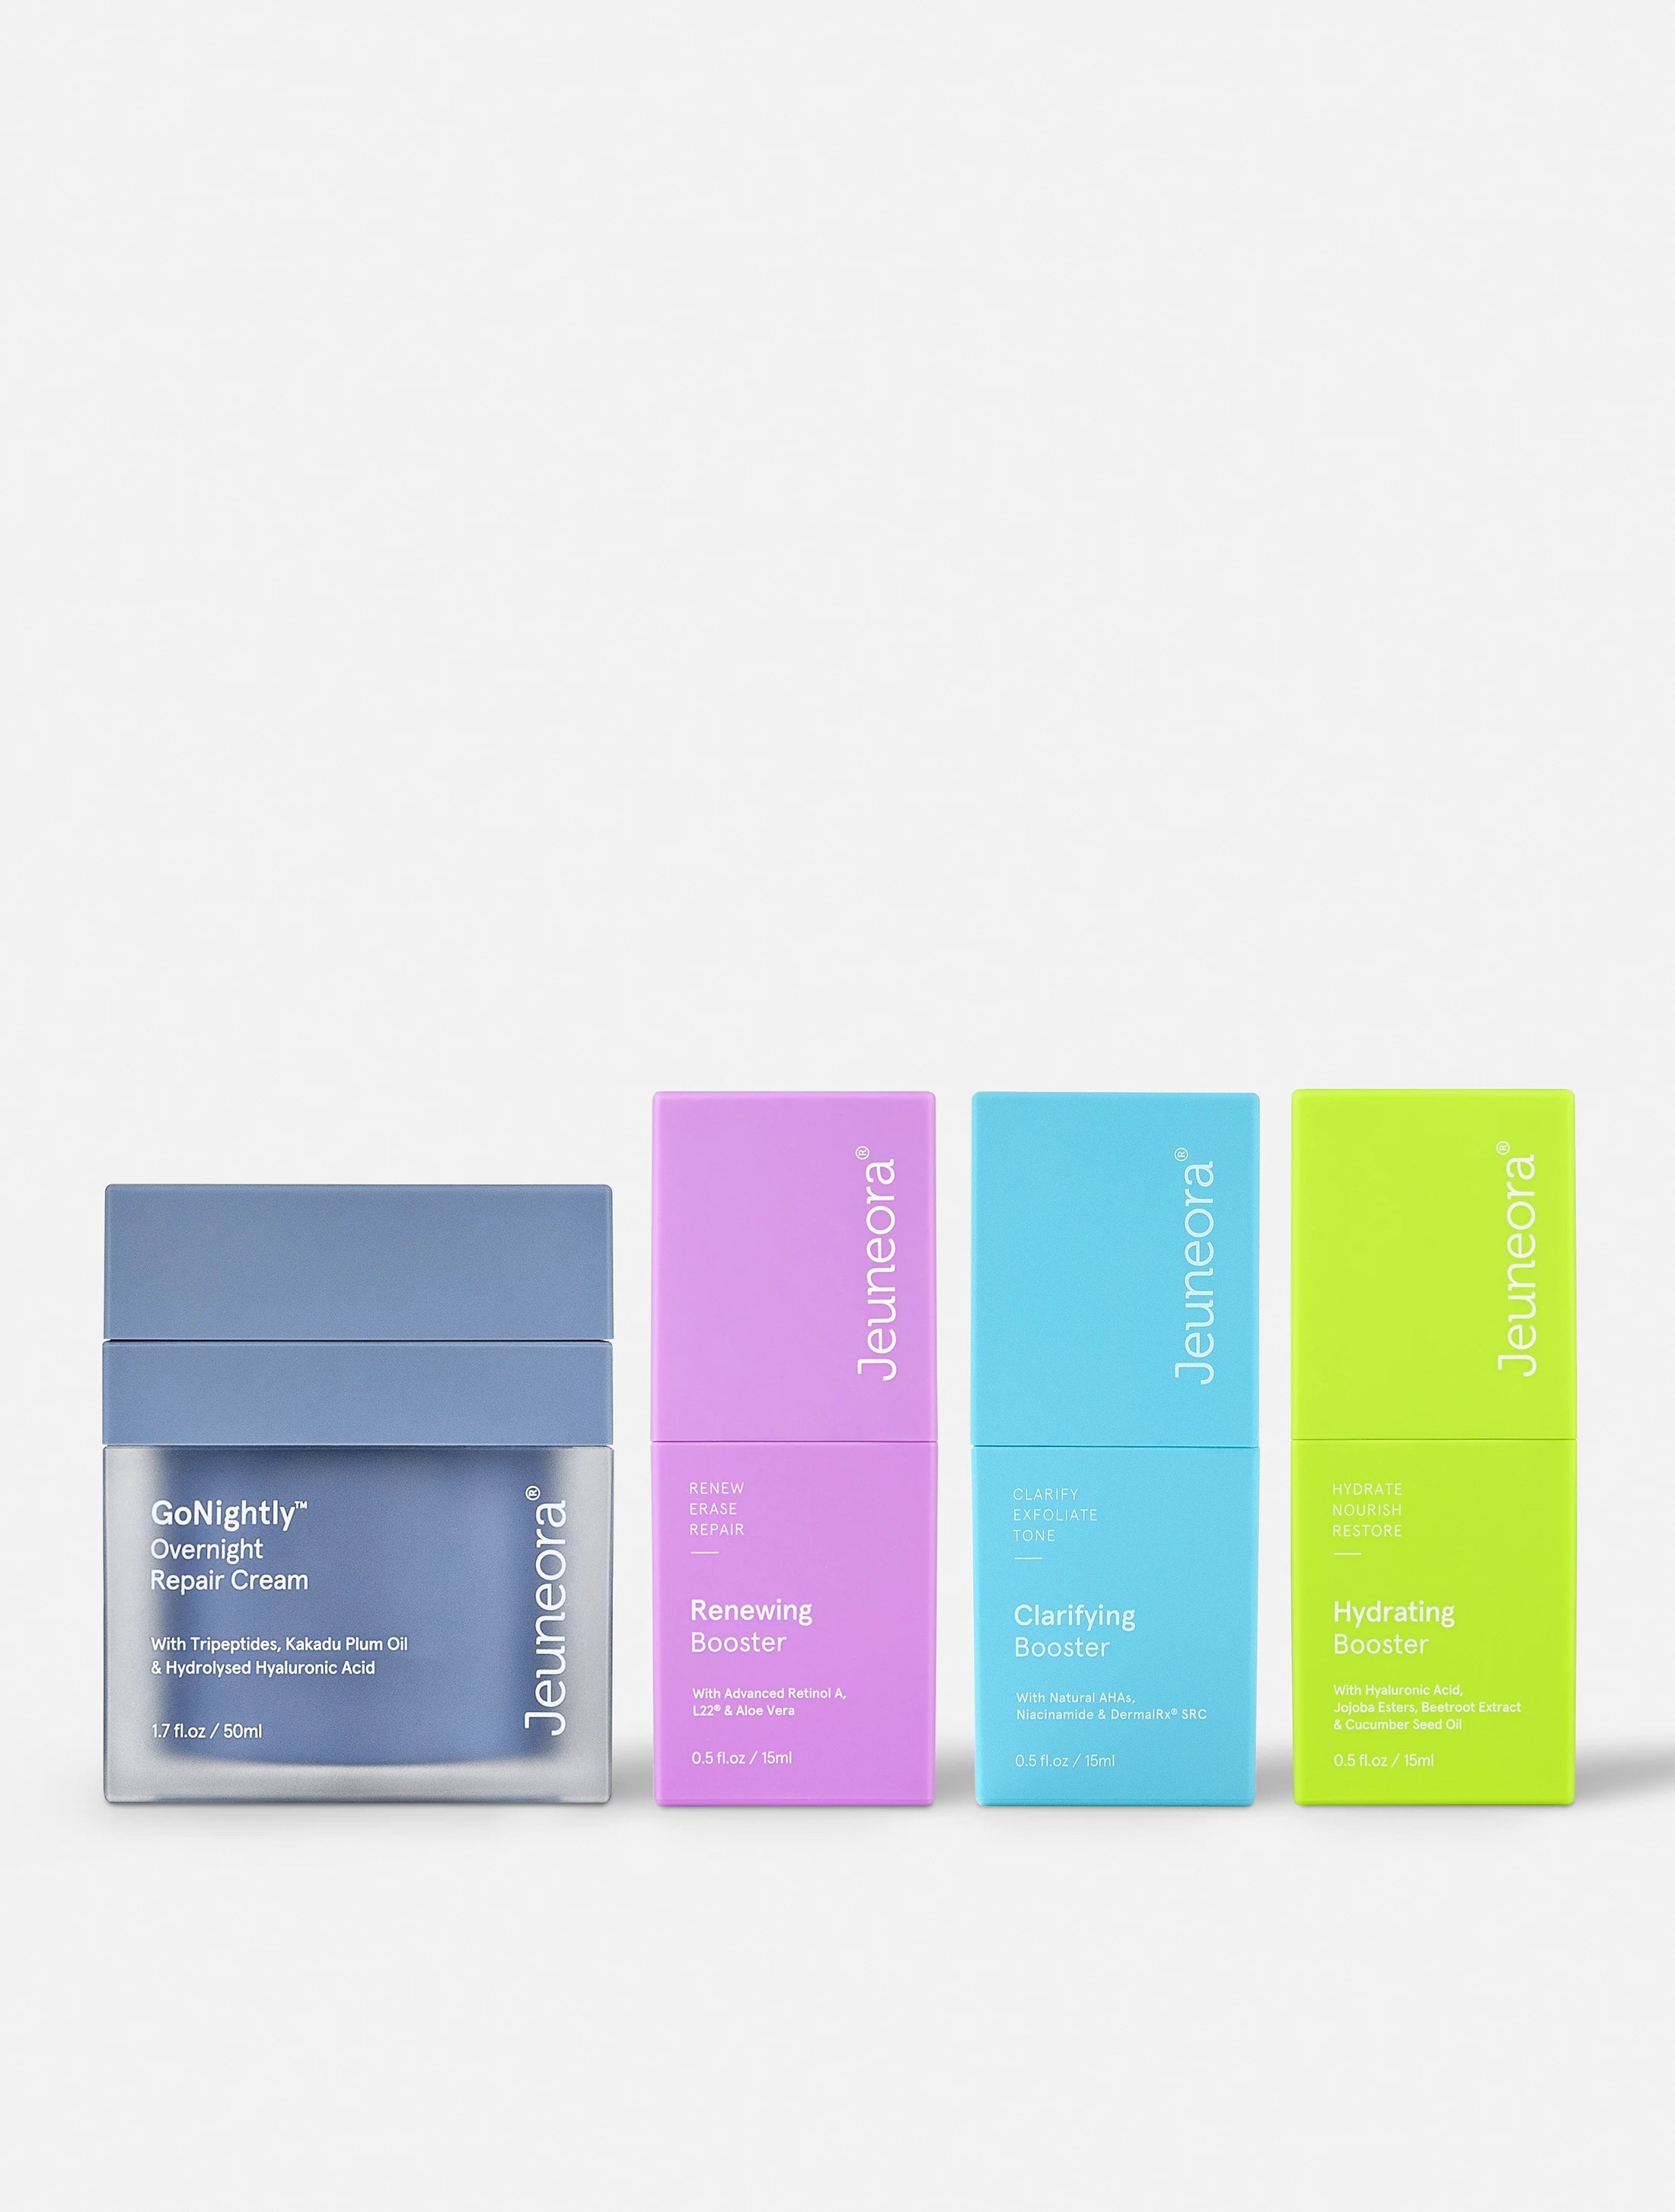 Skin Cycling Pack Renewing Booster, Clarifying Booster, Hydrating Booster, GoNightly